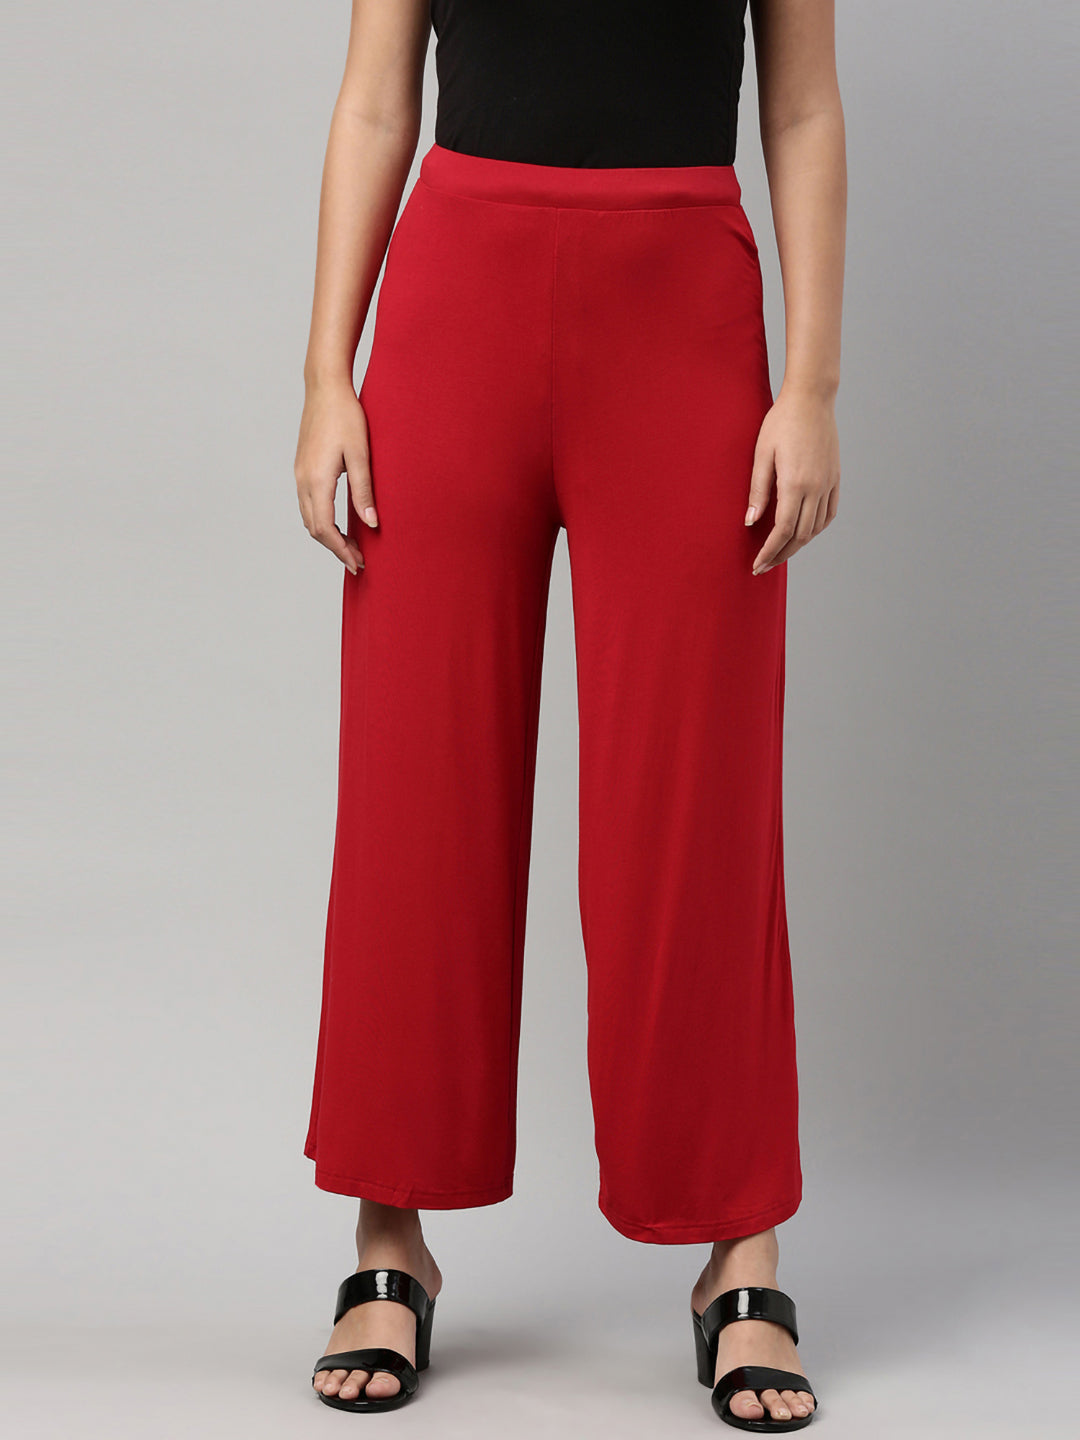 Cozami Casual Denim Palazzo Pant For Girls And Women in Delhi at best price  by A V Collection  Justdial